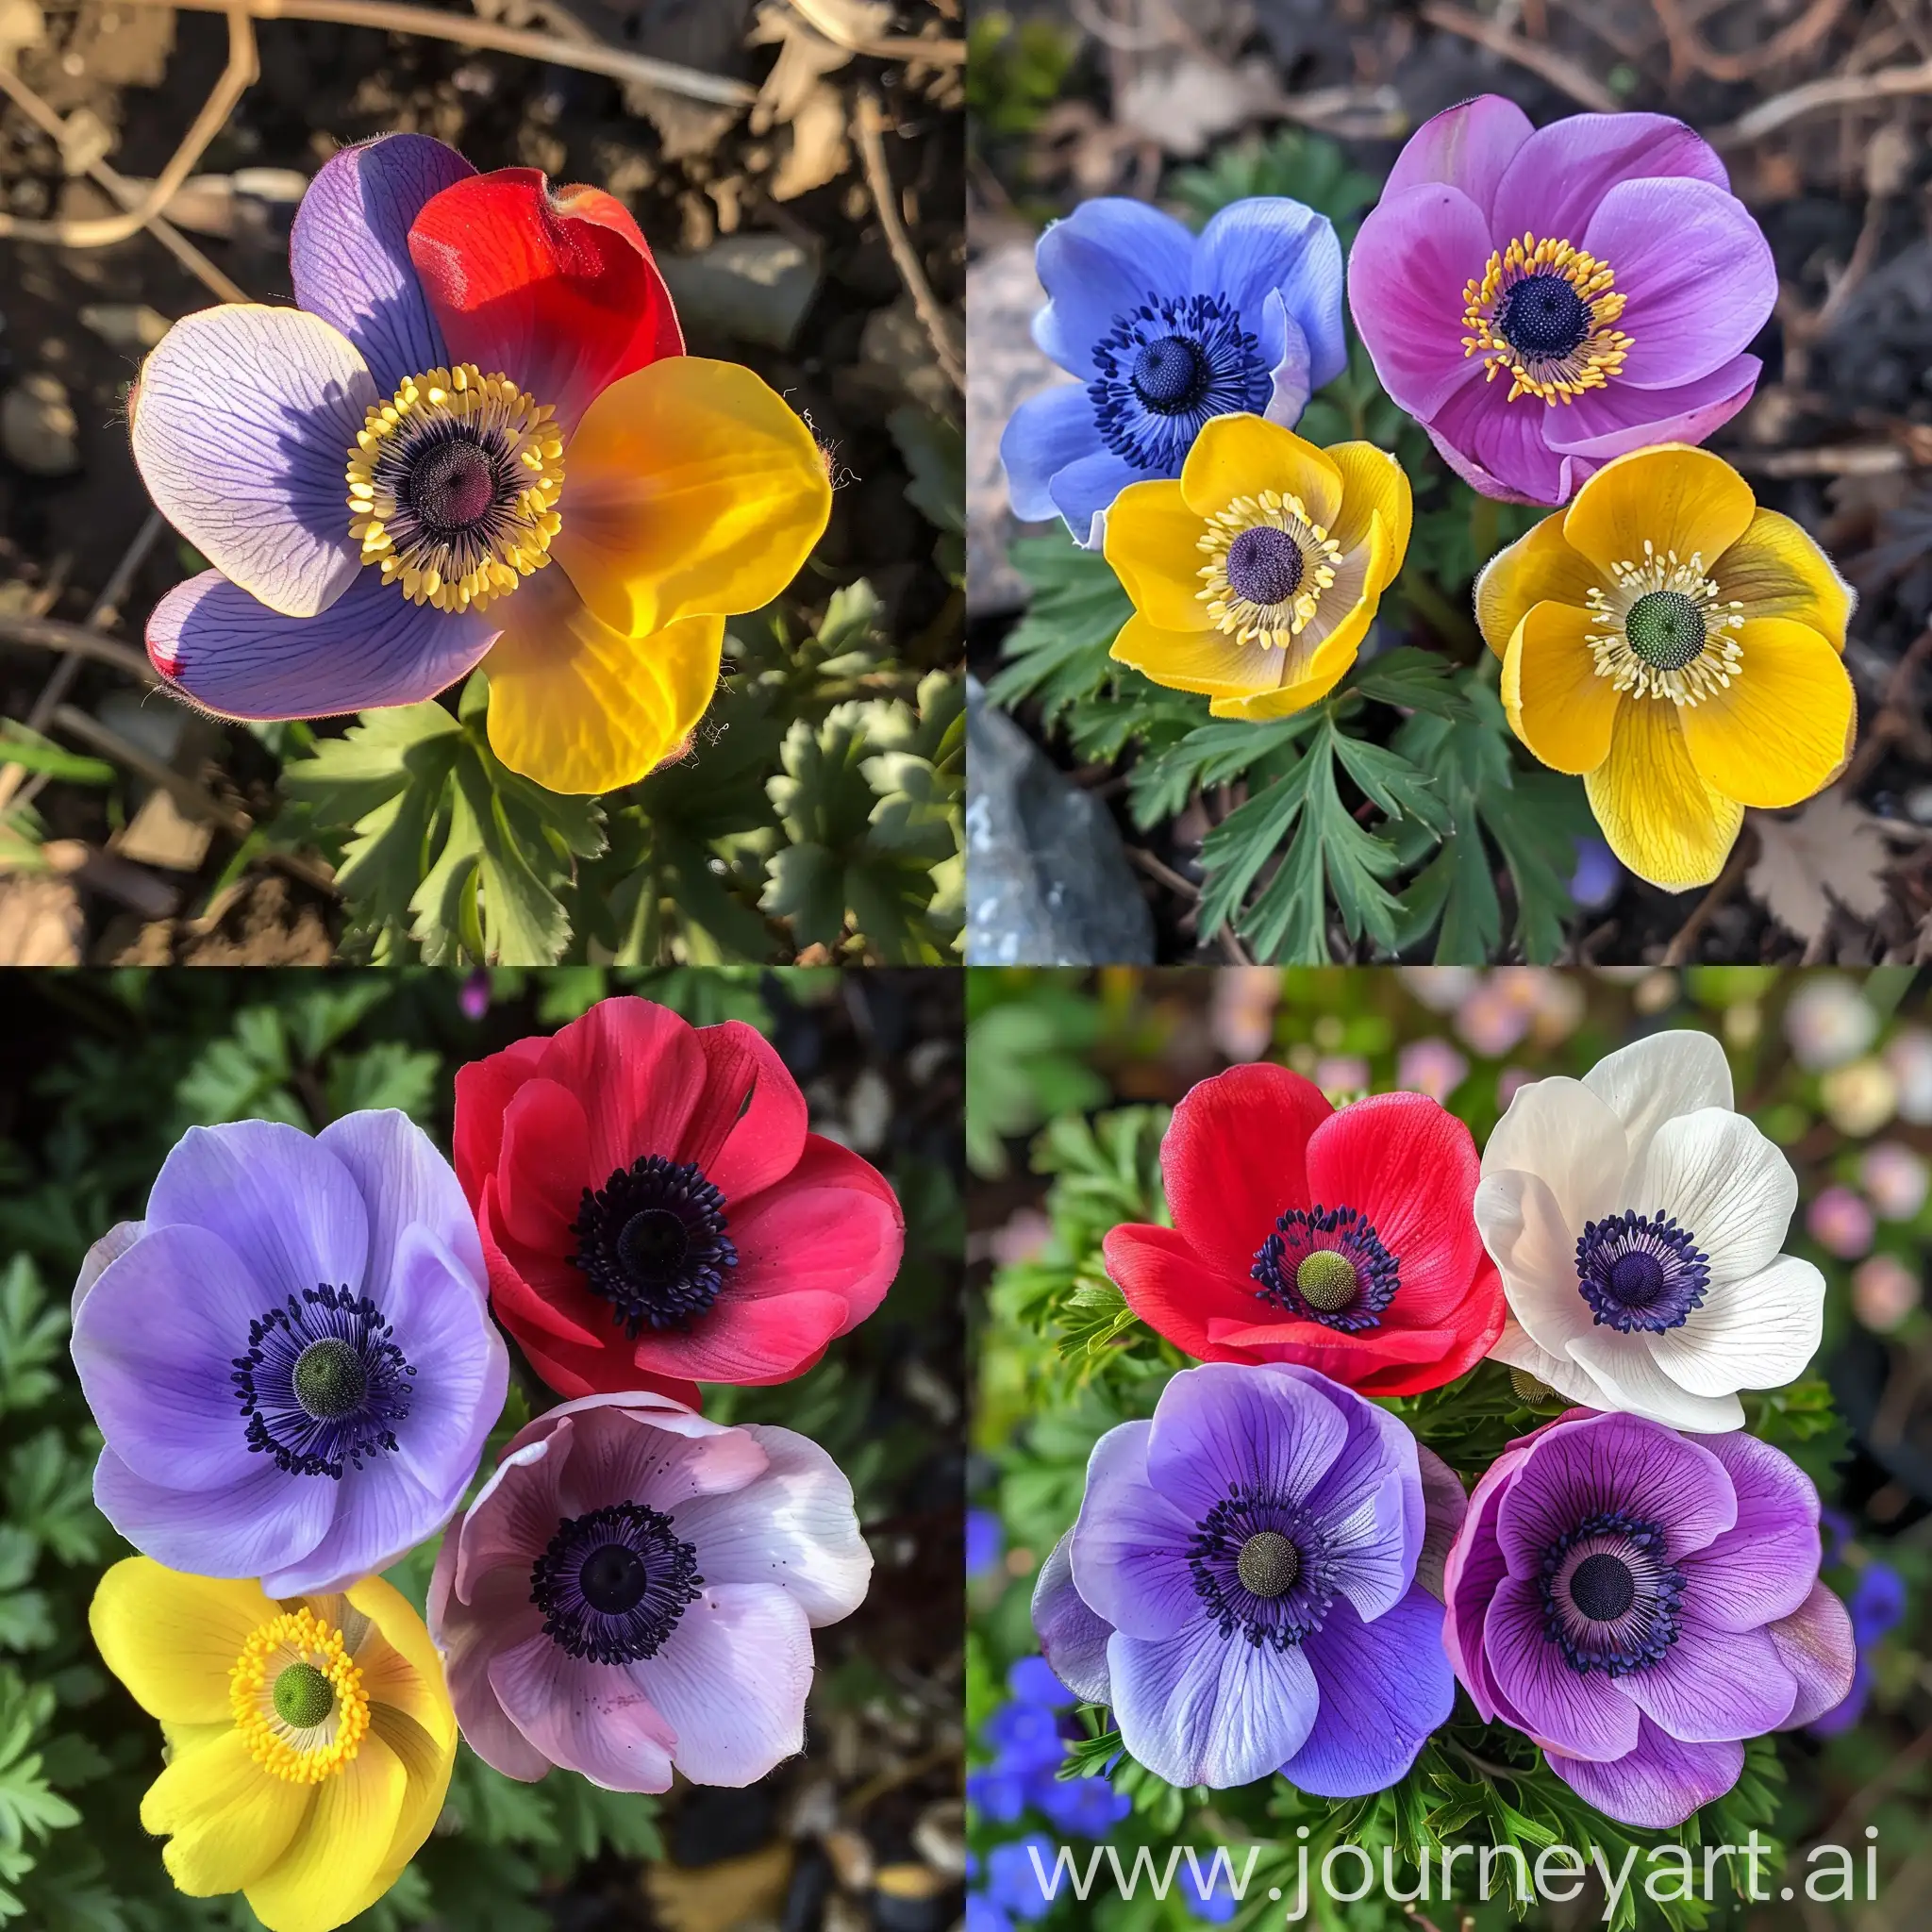 Anemone-Flower-with-Four-Vibrantly-Colored-Petals